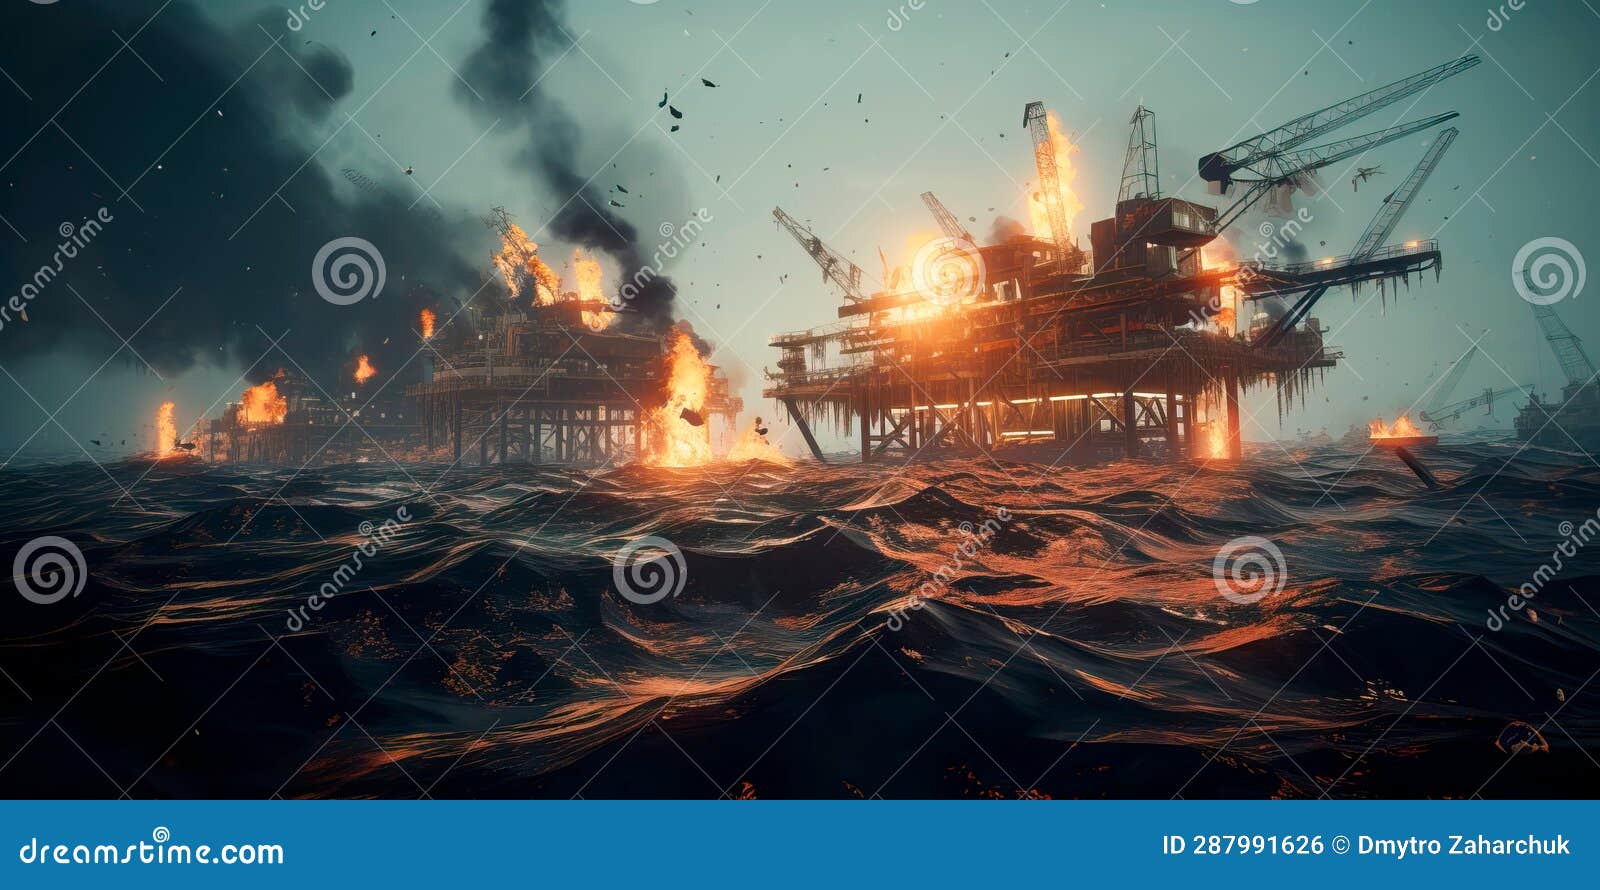 an oil rig disaster at sea, with oil slicks spreading across the ocean surface and threatening marine life. generative